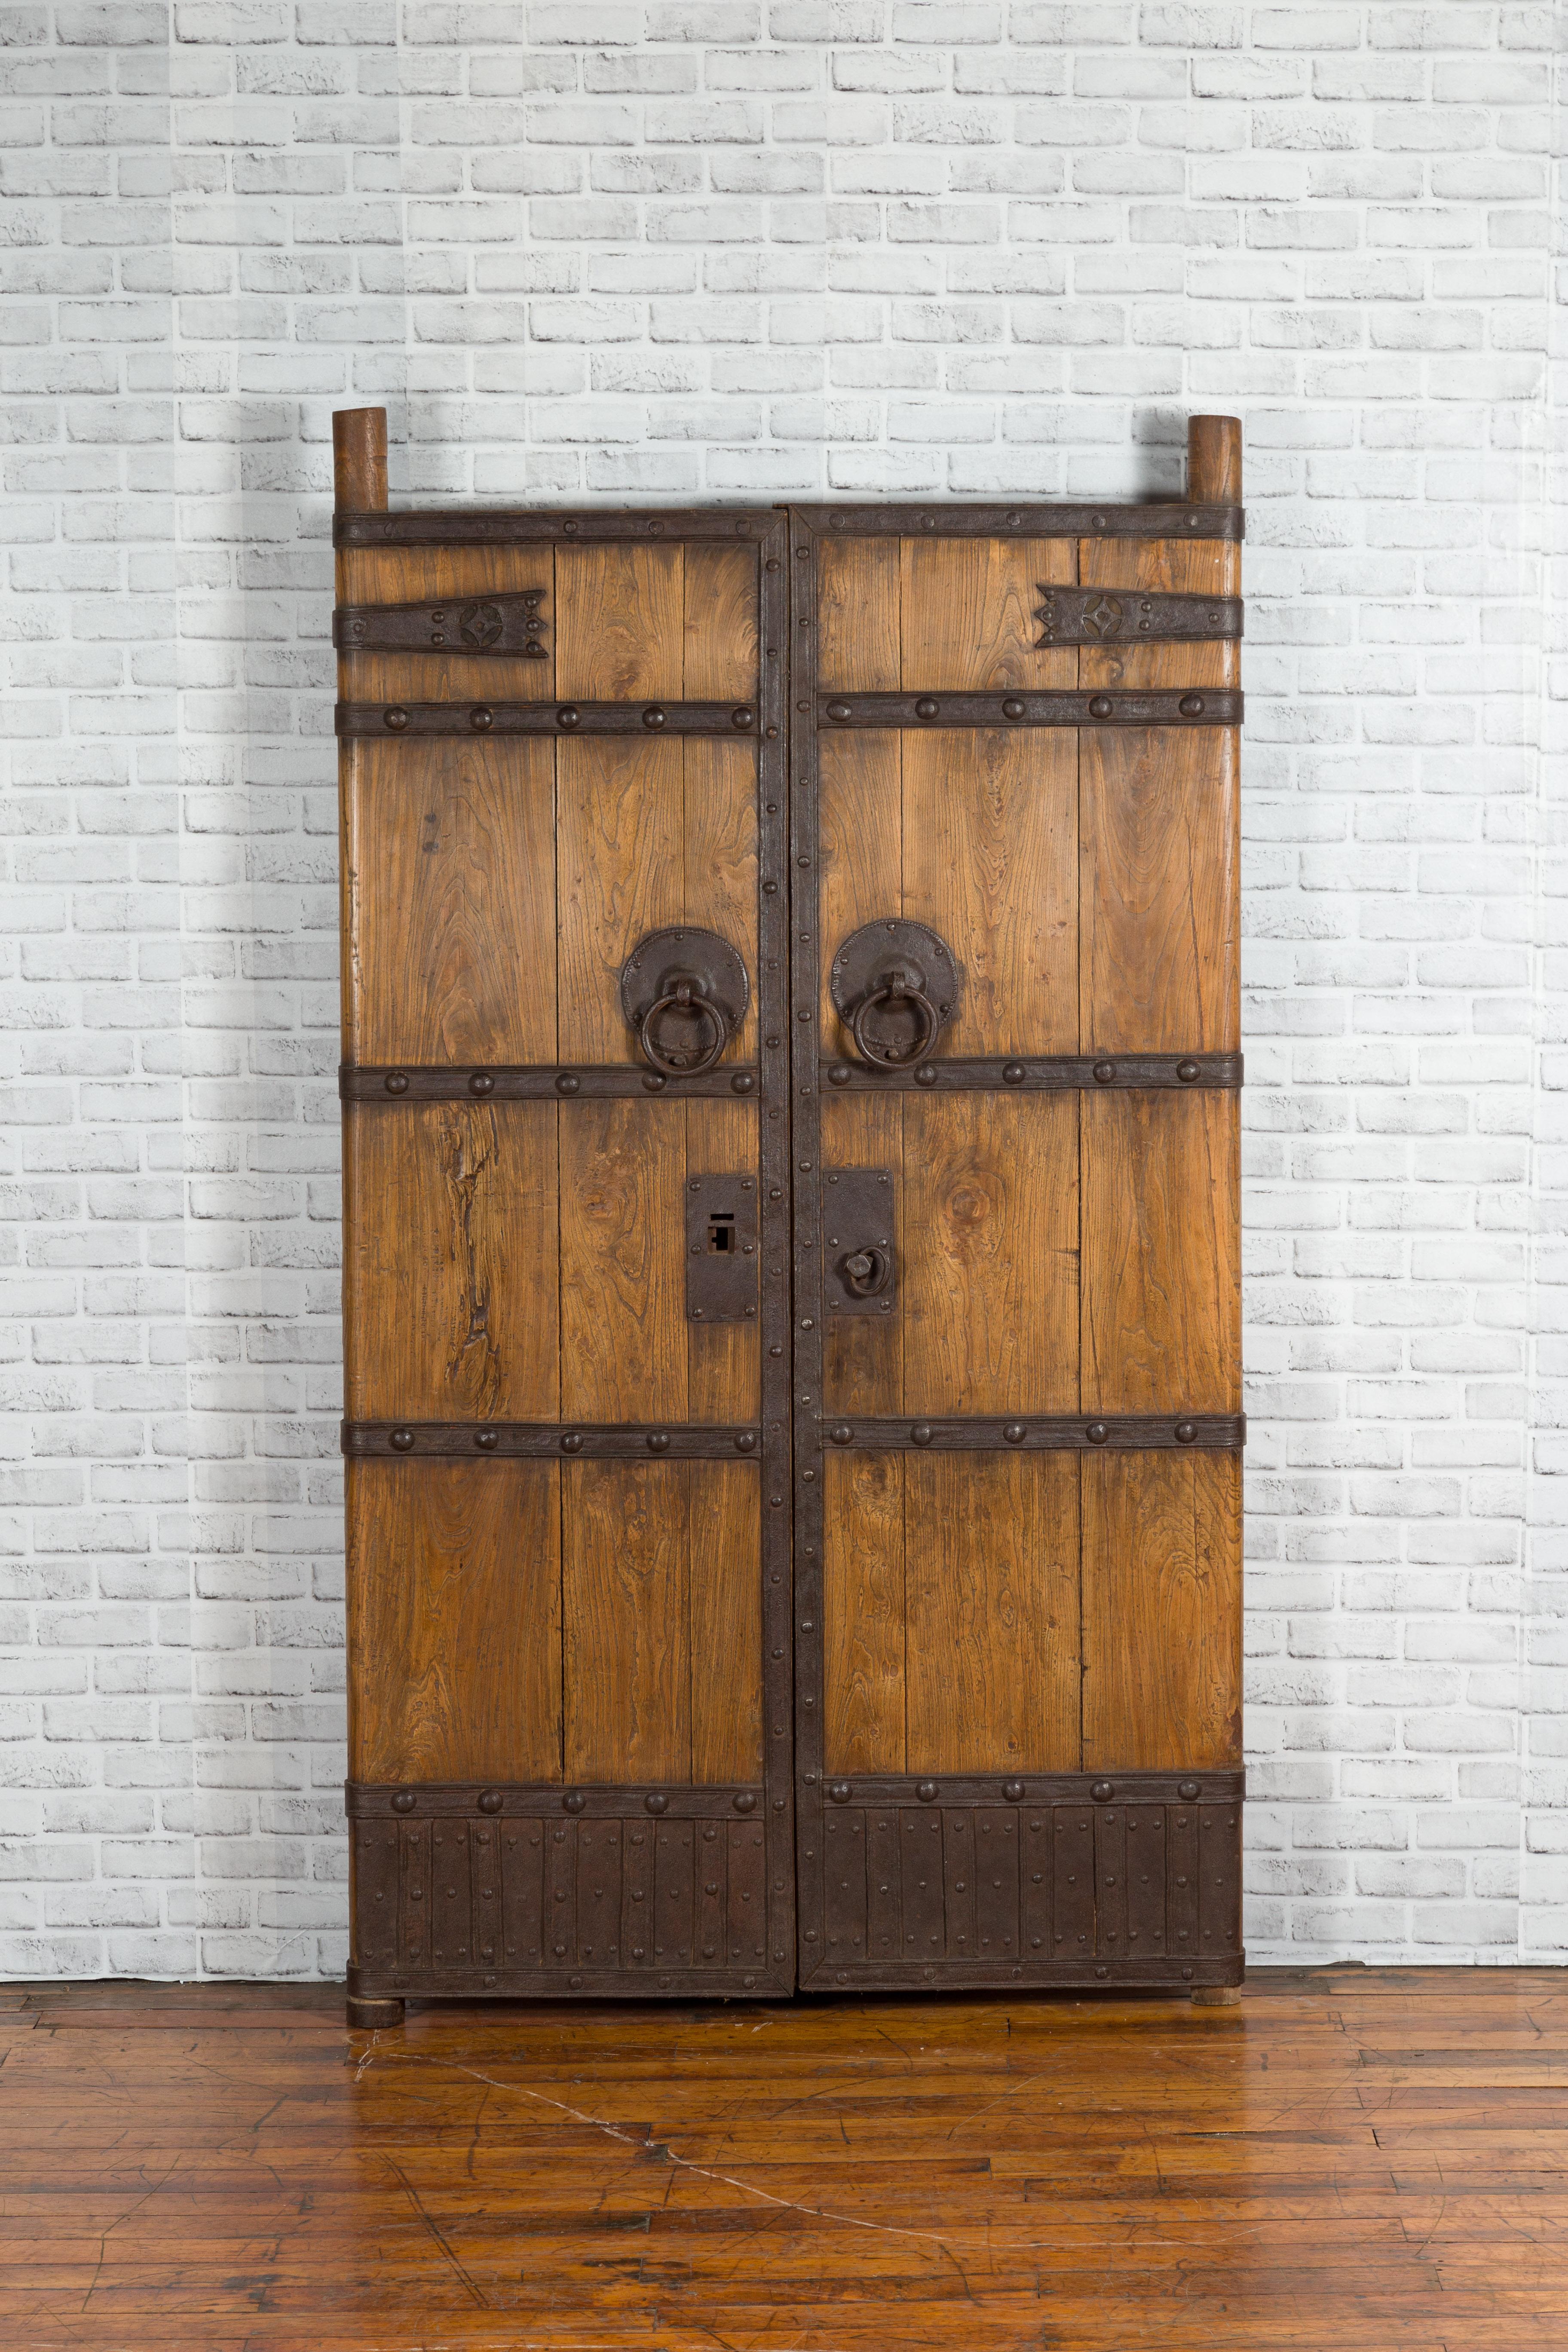 A pair of Chinese Qing Dynasty period wooden palace doors from the 19th century with iron fittings. Created in China during the Qing Dynasty, this pair of palace doors will make for a real statement! Presenting vertical slats strengthened with iron